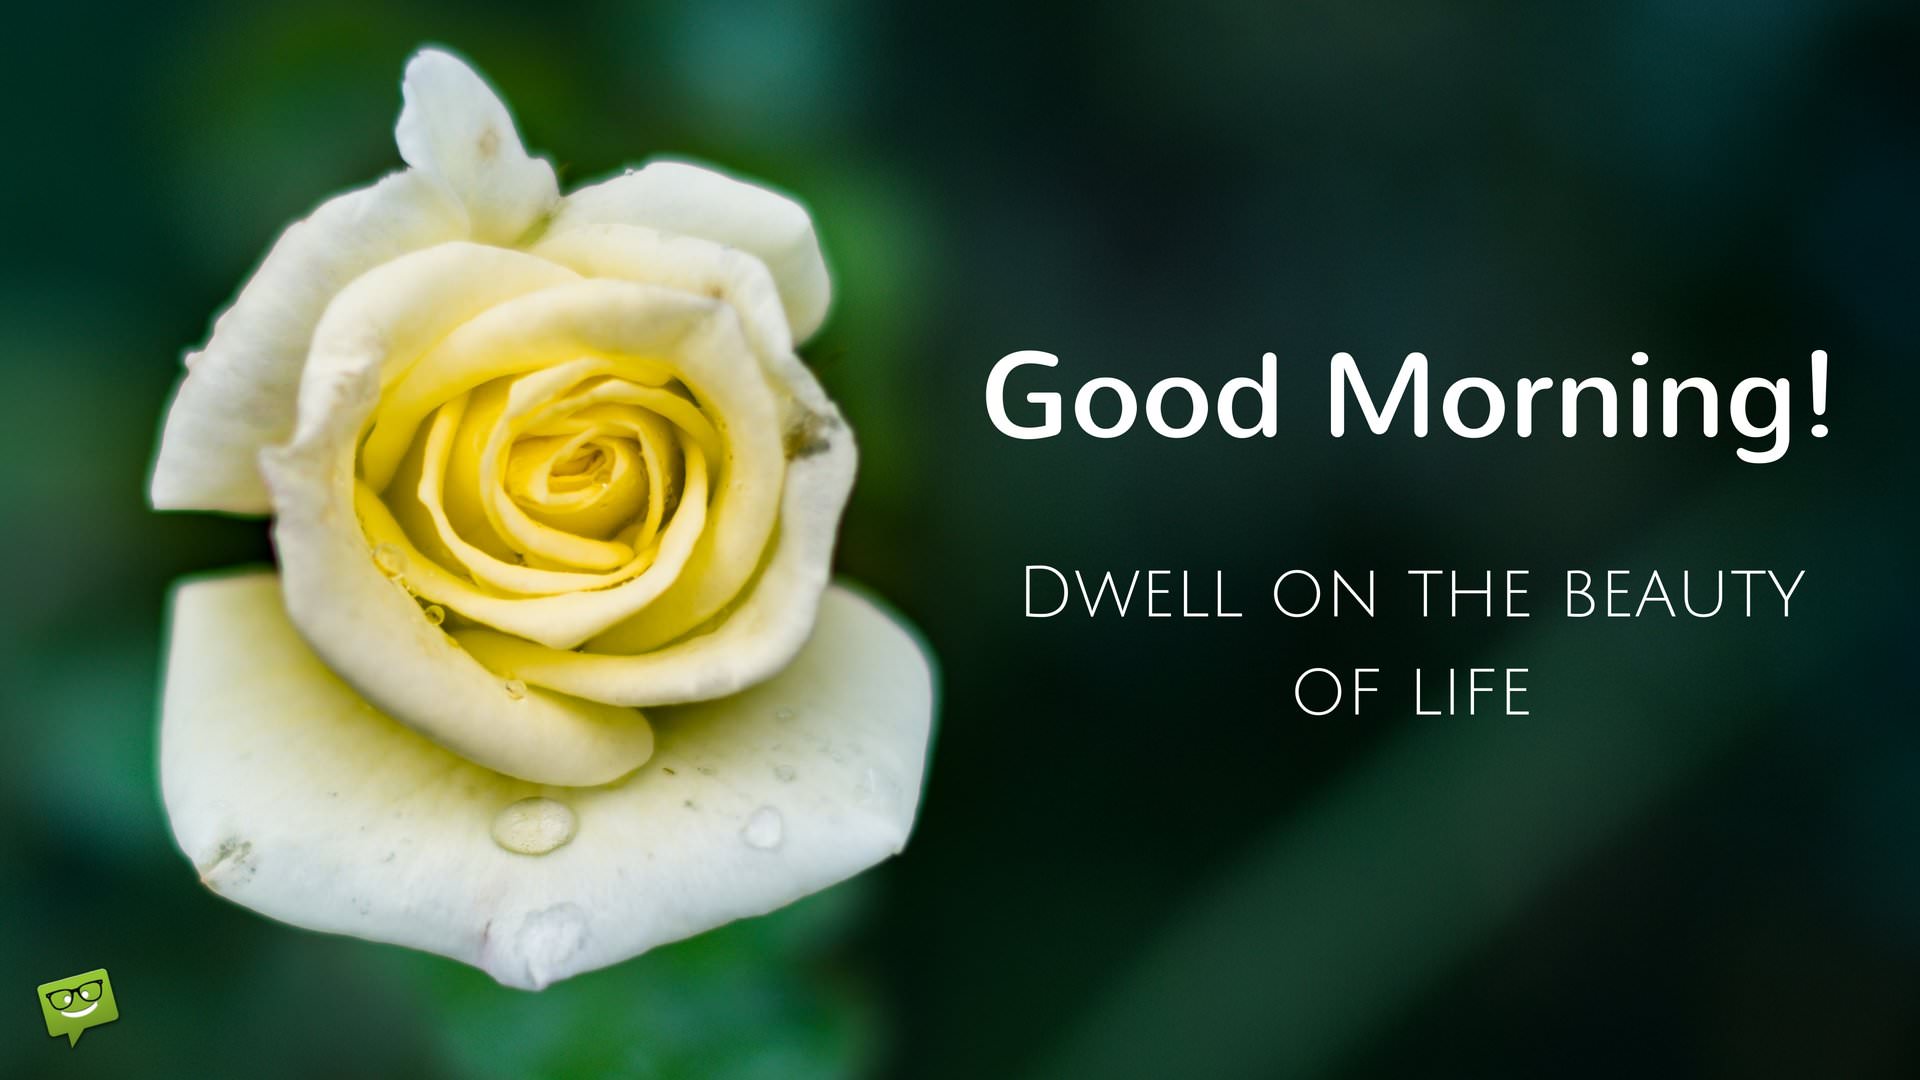 Good Morning Dwell On The Beauty Of Life - Positivity Good Morning Images With Quotes - HD Wallpaper 